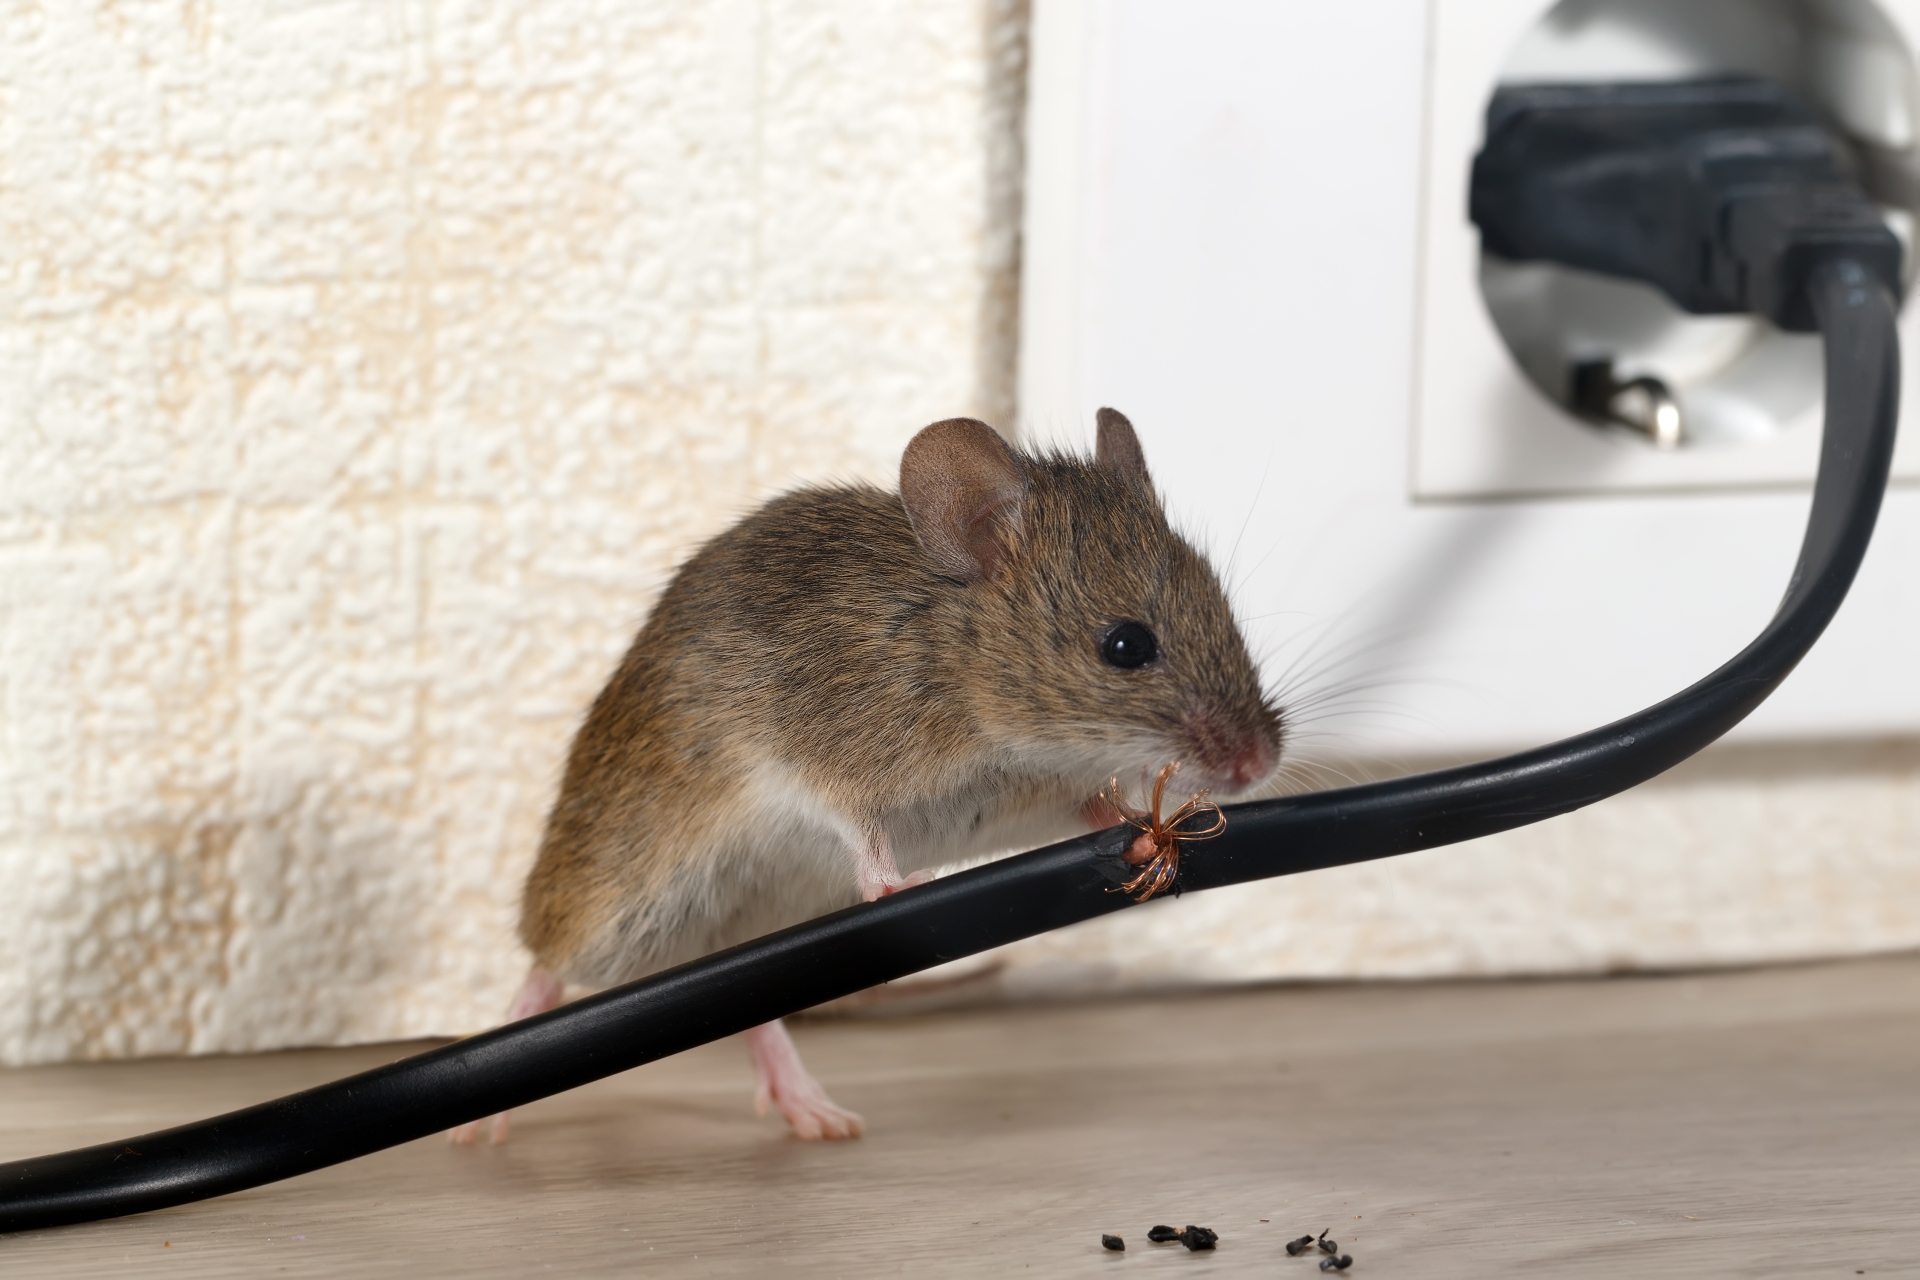 Mice Infestation, Pest Control in Grays, Badgers Dene, RM17. Call Now 020 8166 9746